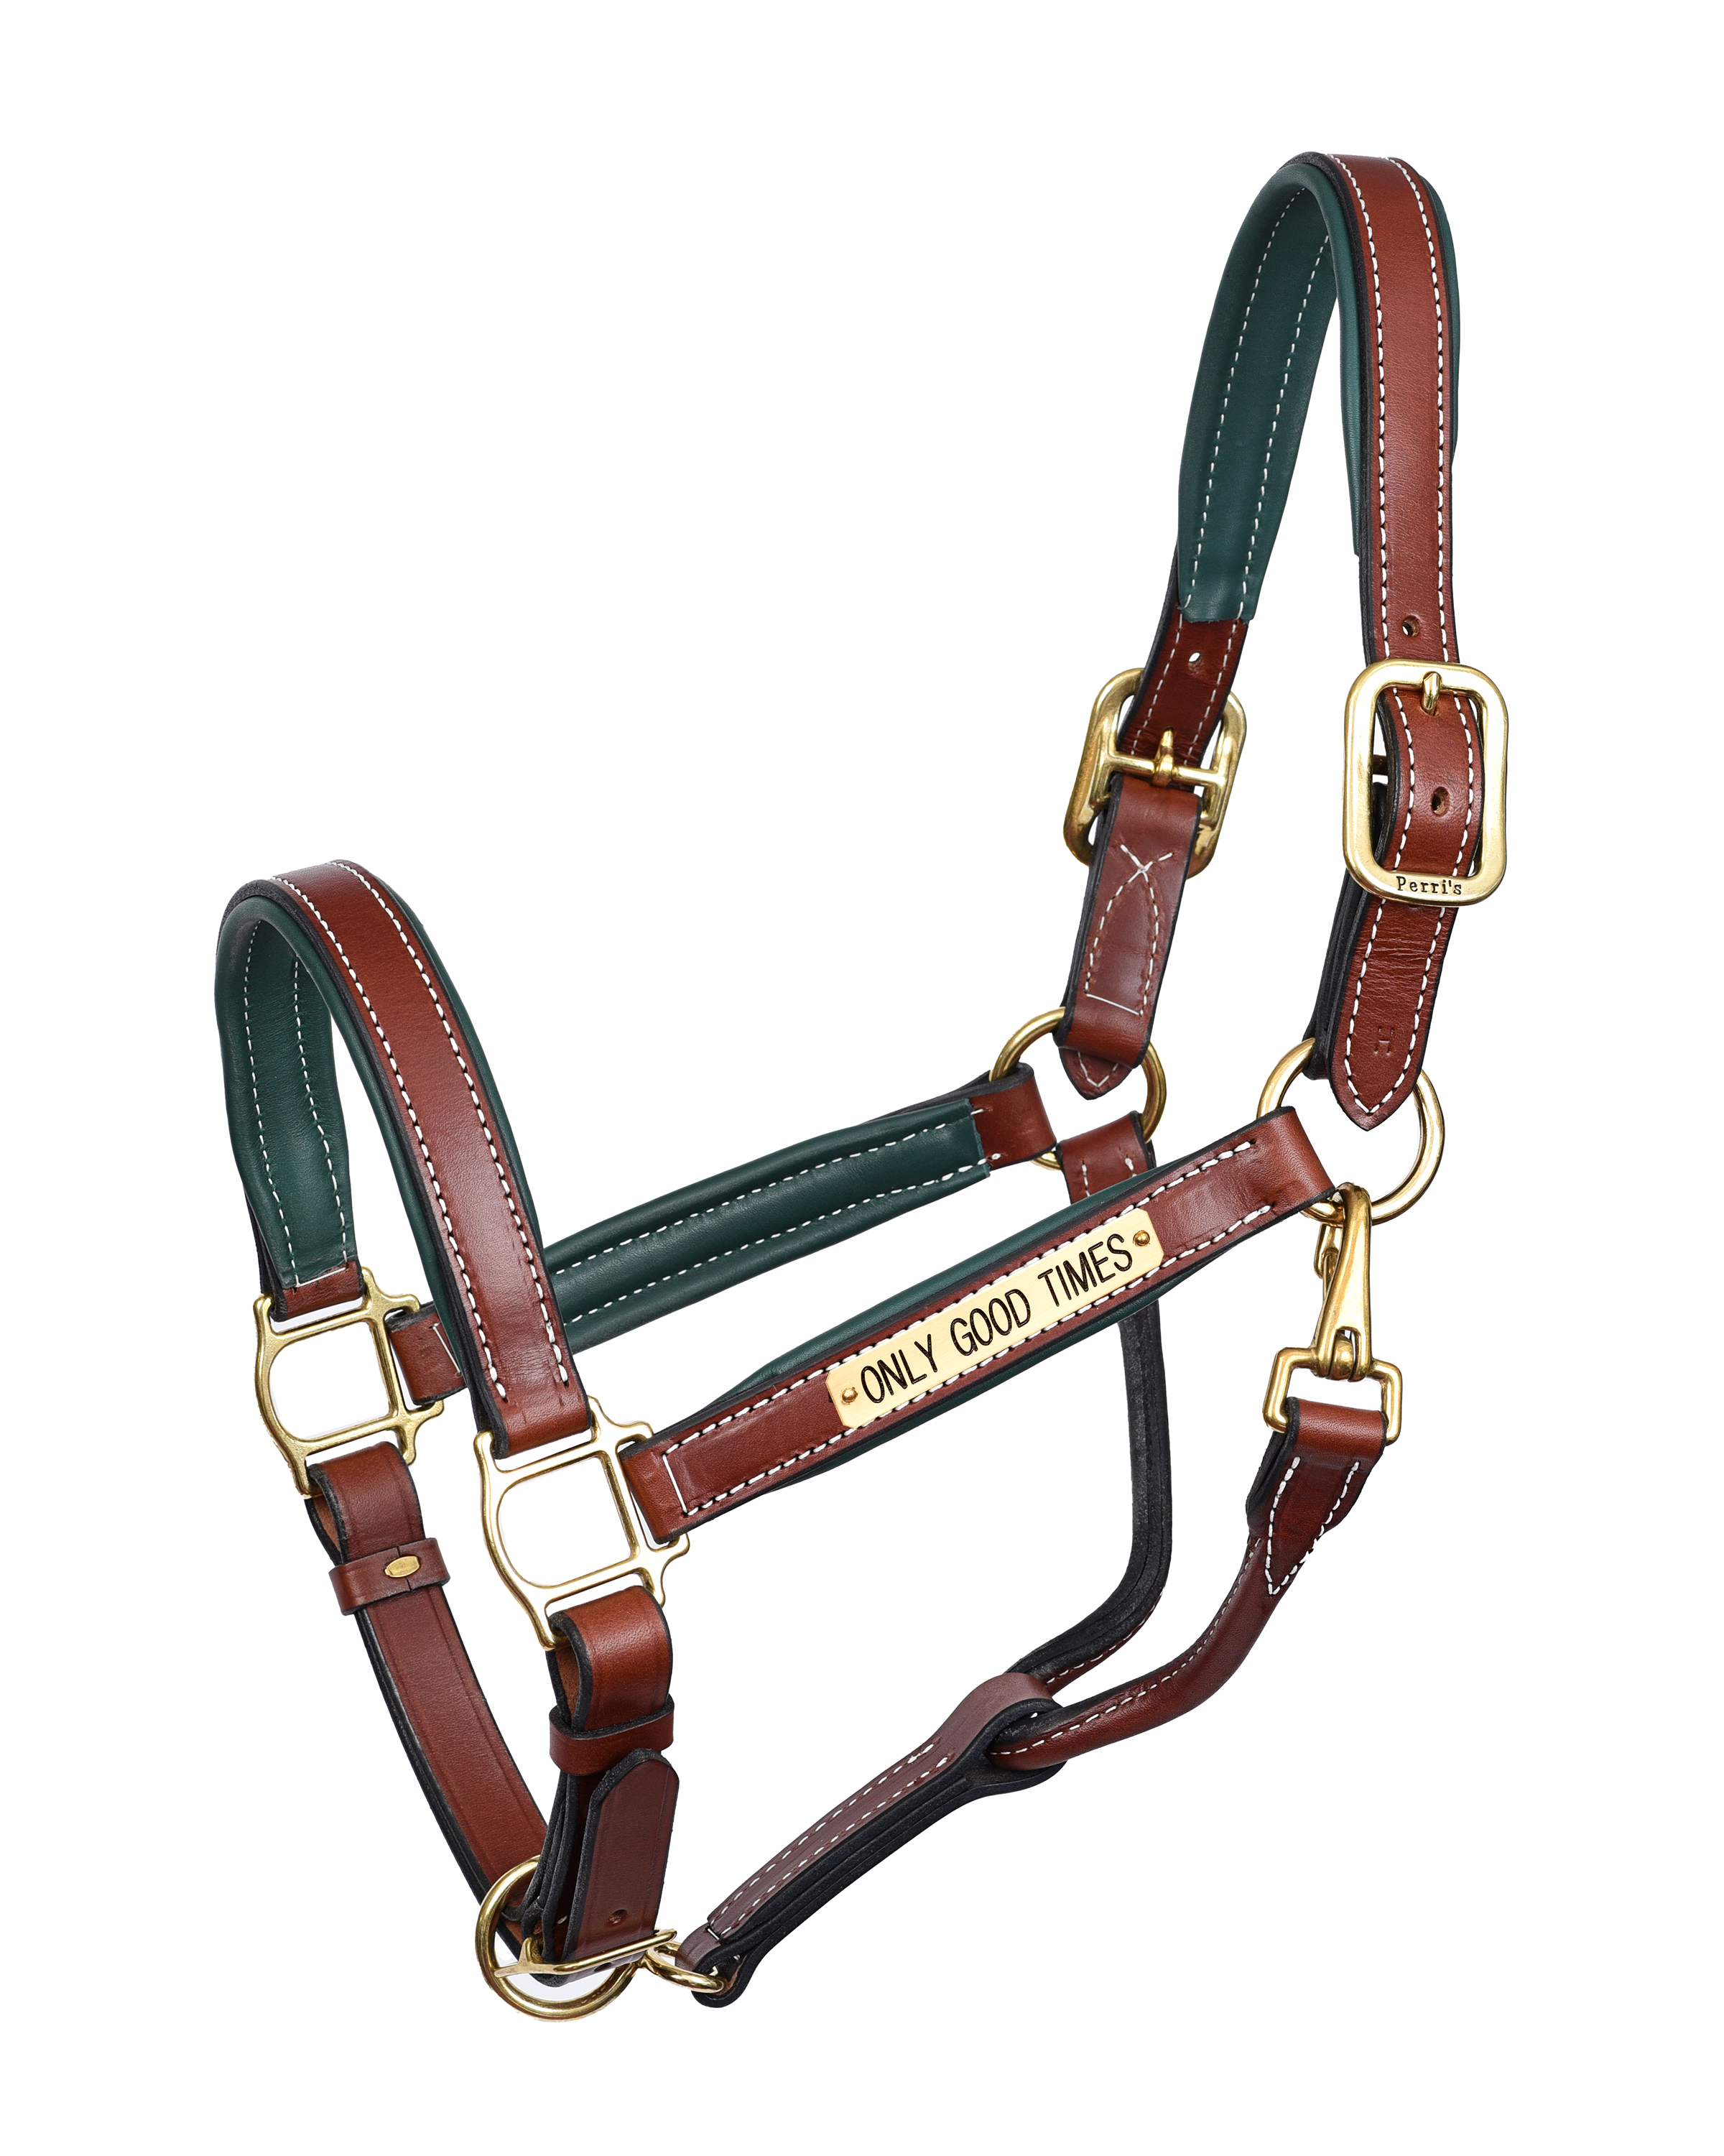 HRS CHEST / HUNTER PAD LEATHER HALTER W / PLATE